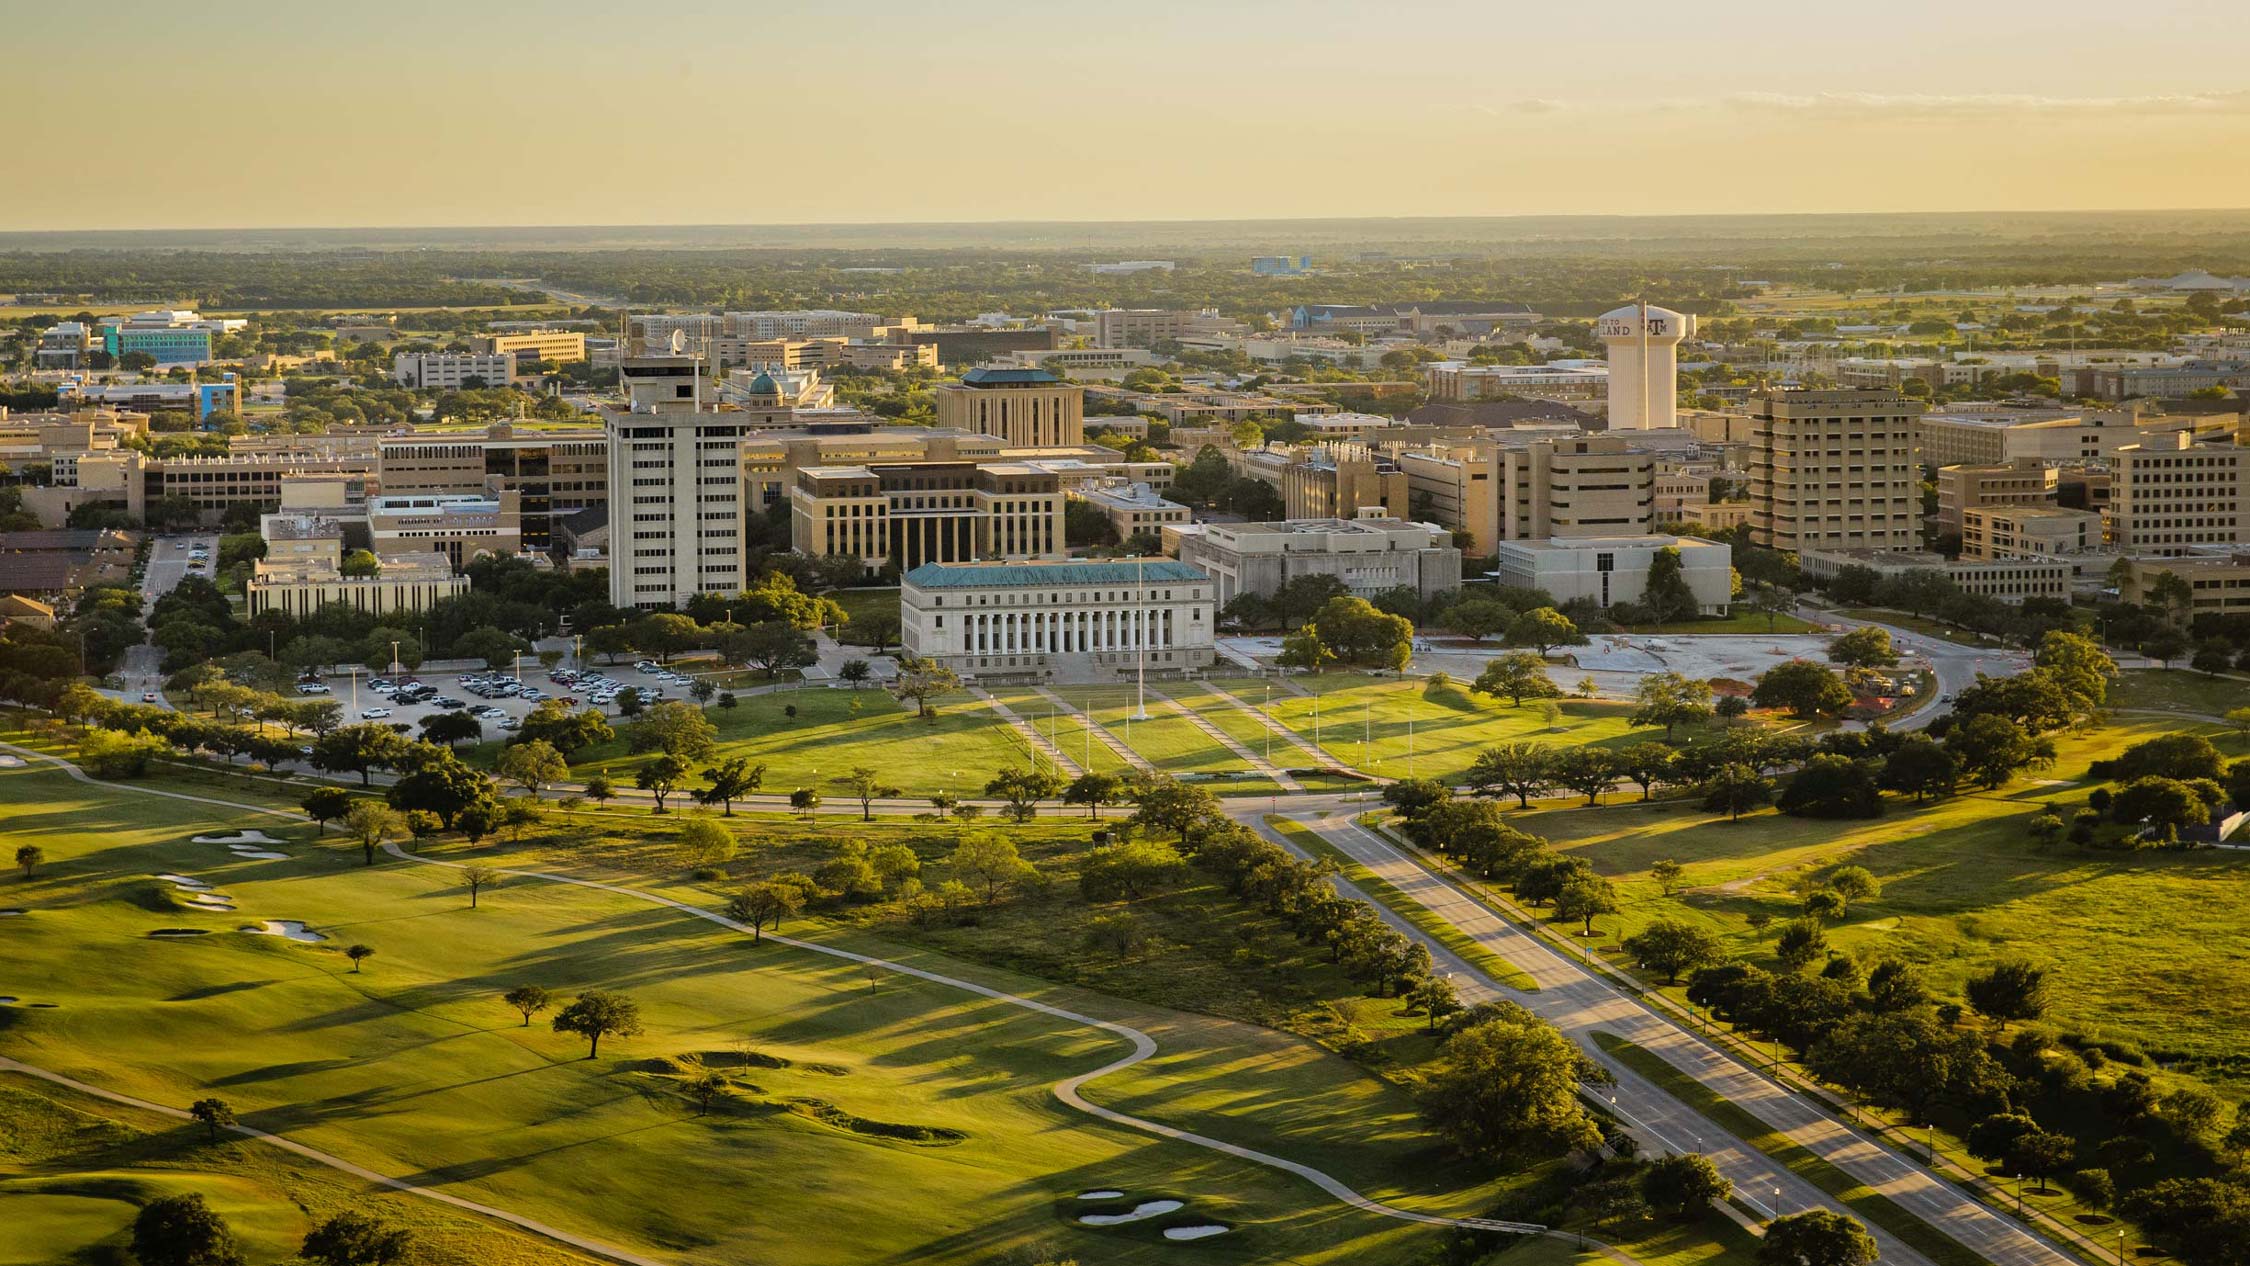 An aerial view of the Texas A&M University campus during golden hour